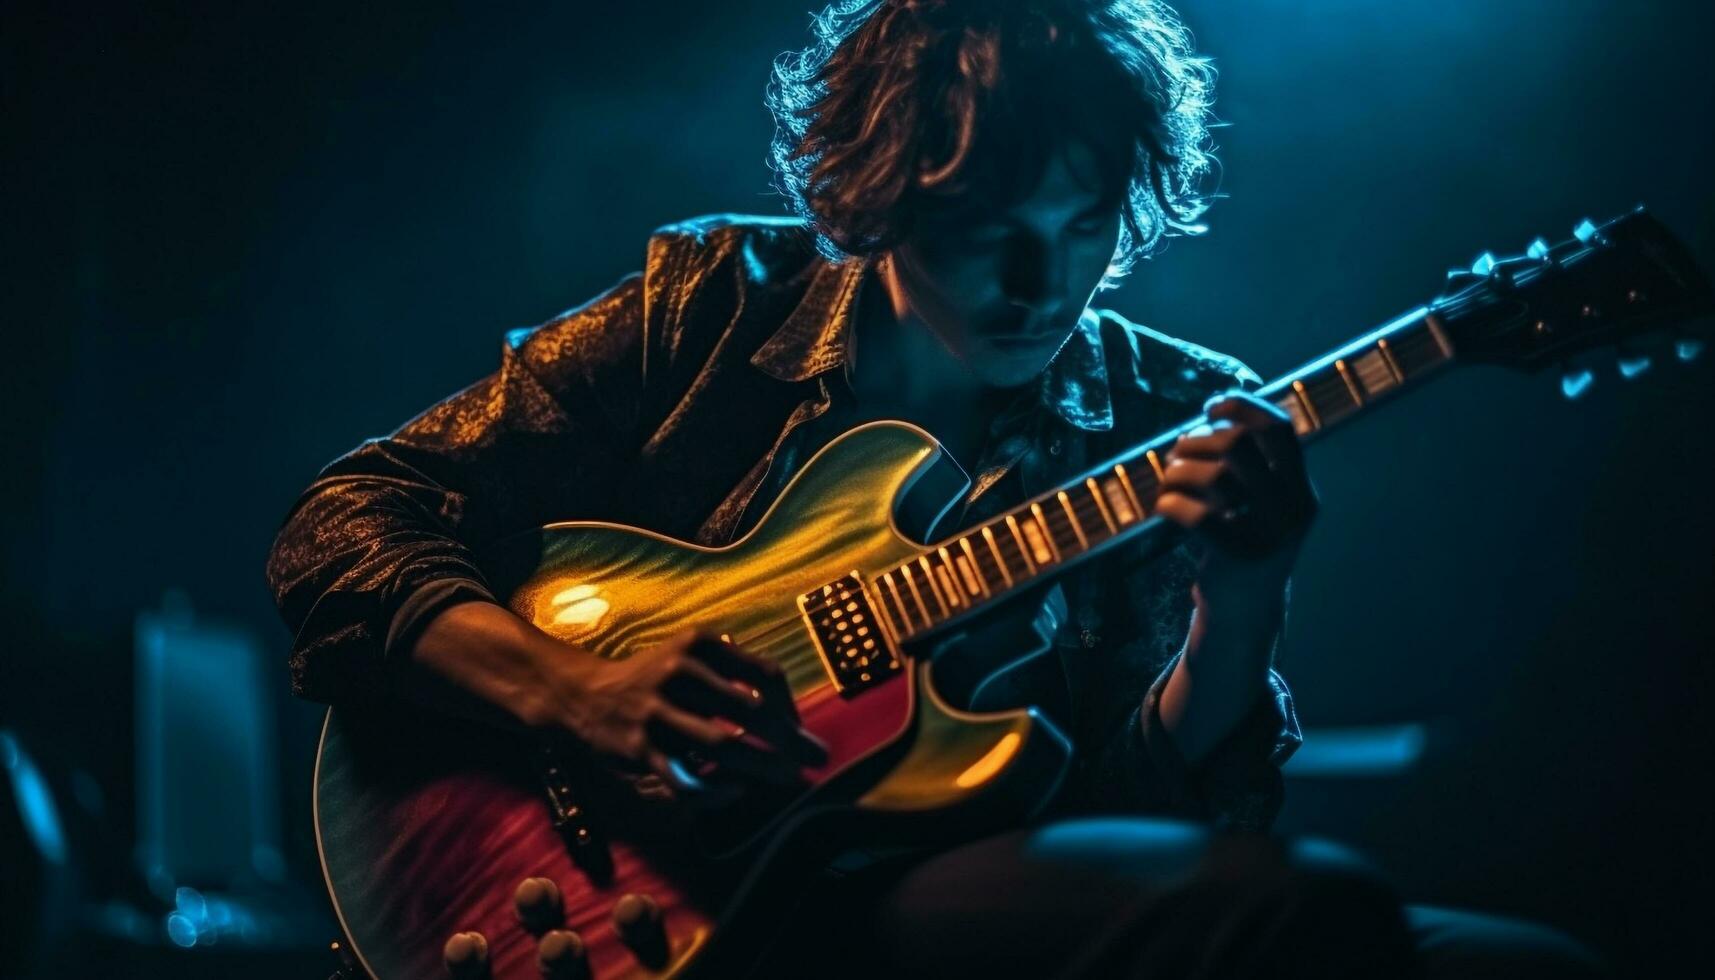 playing electric guitar on stage generated by AI photo